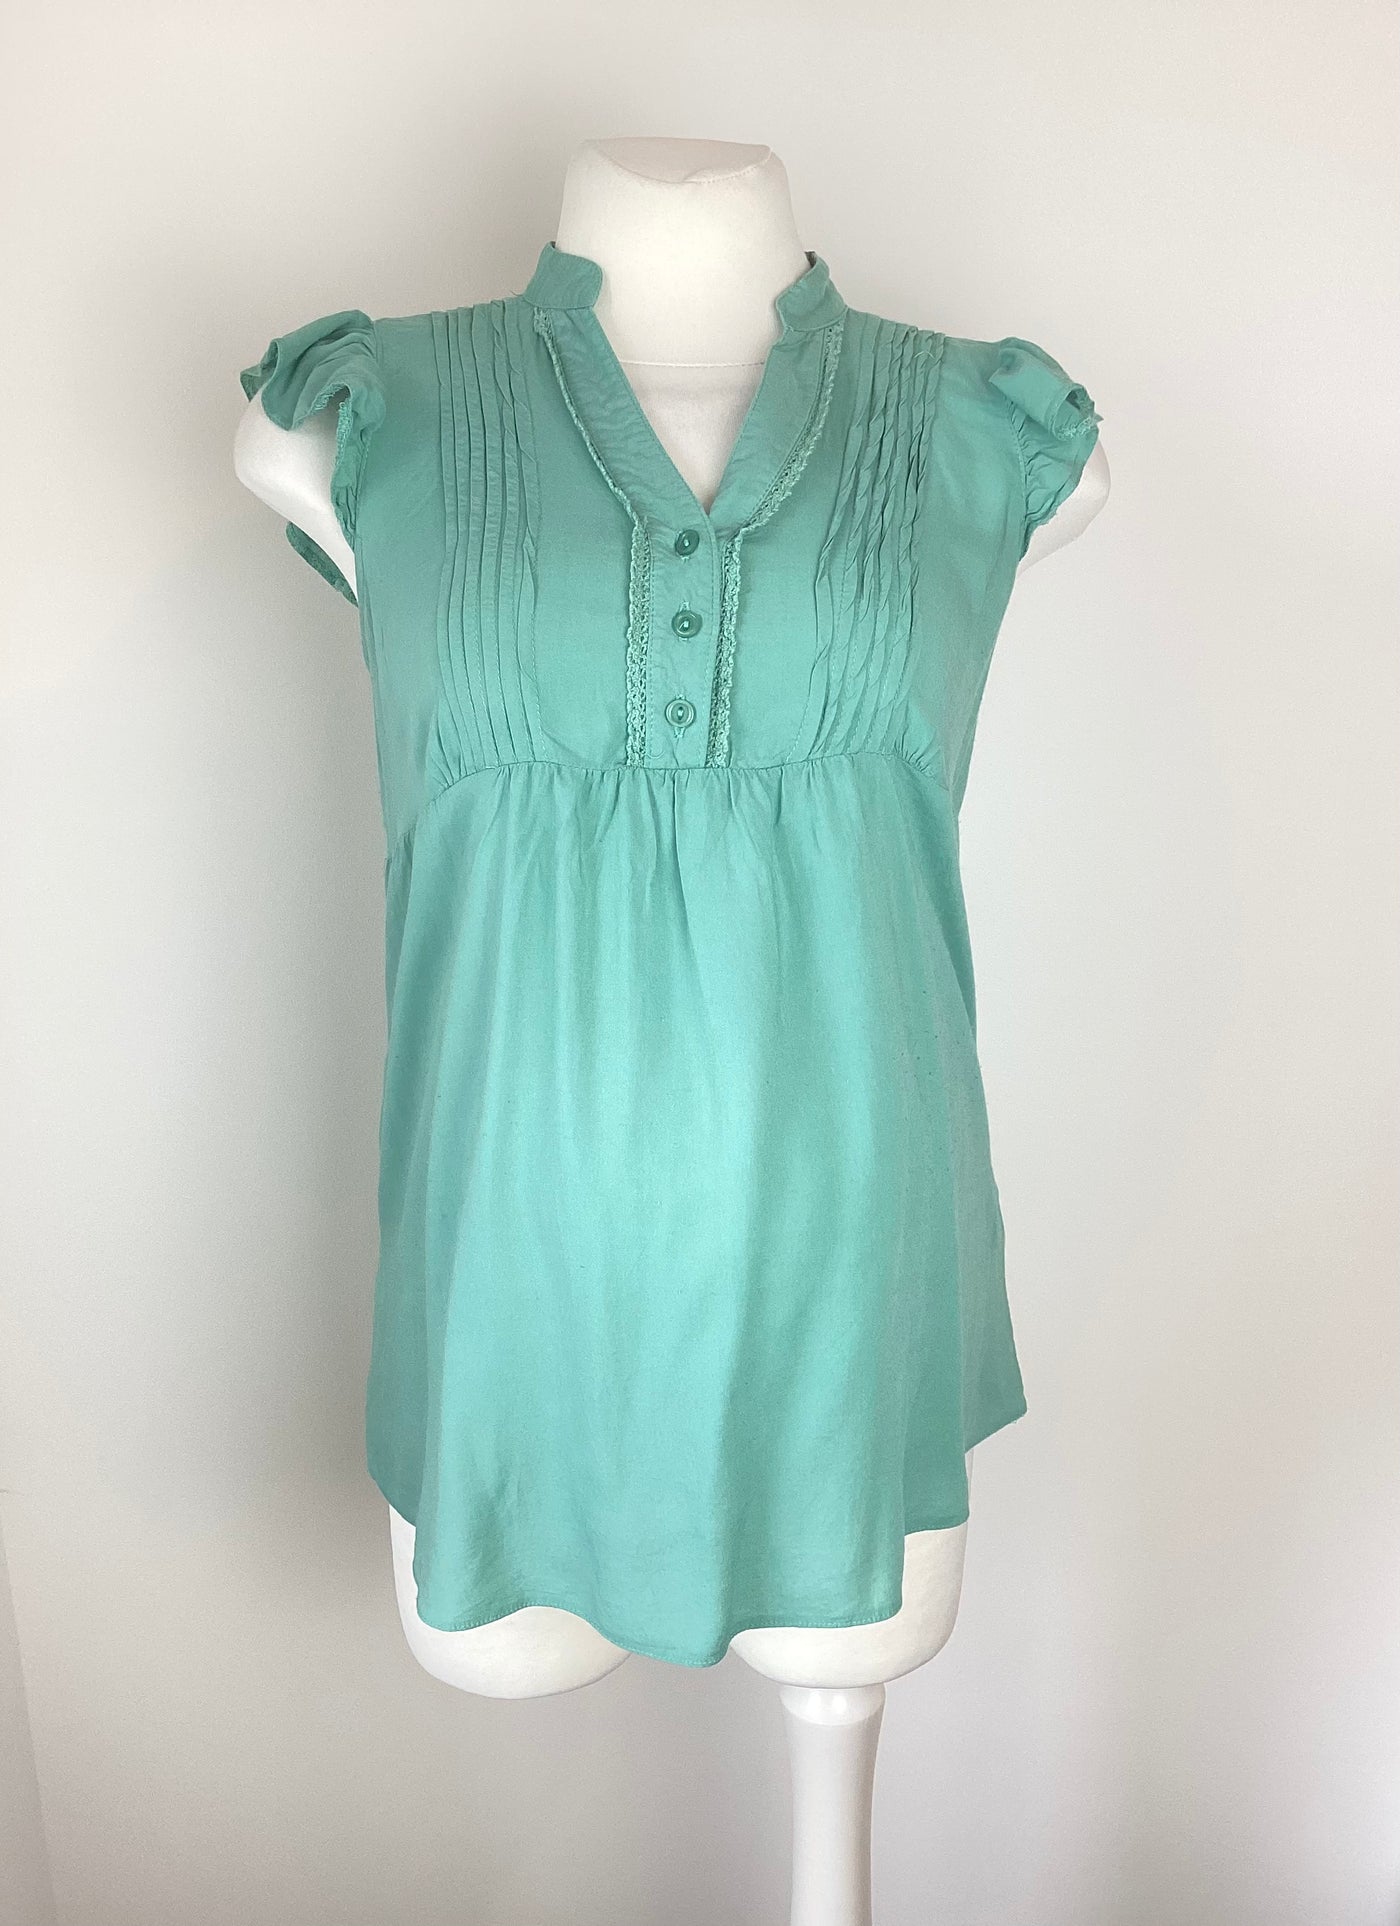 New Look Maternity green cap sleeve top with 3 button front - Size 8